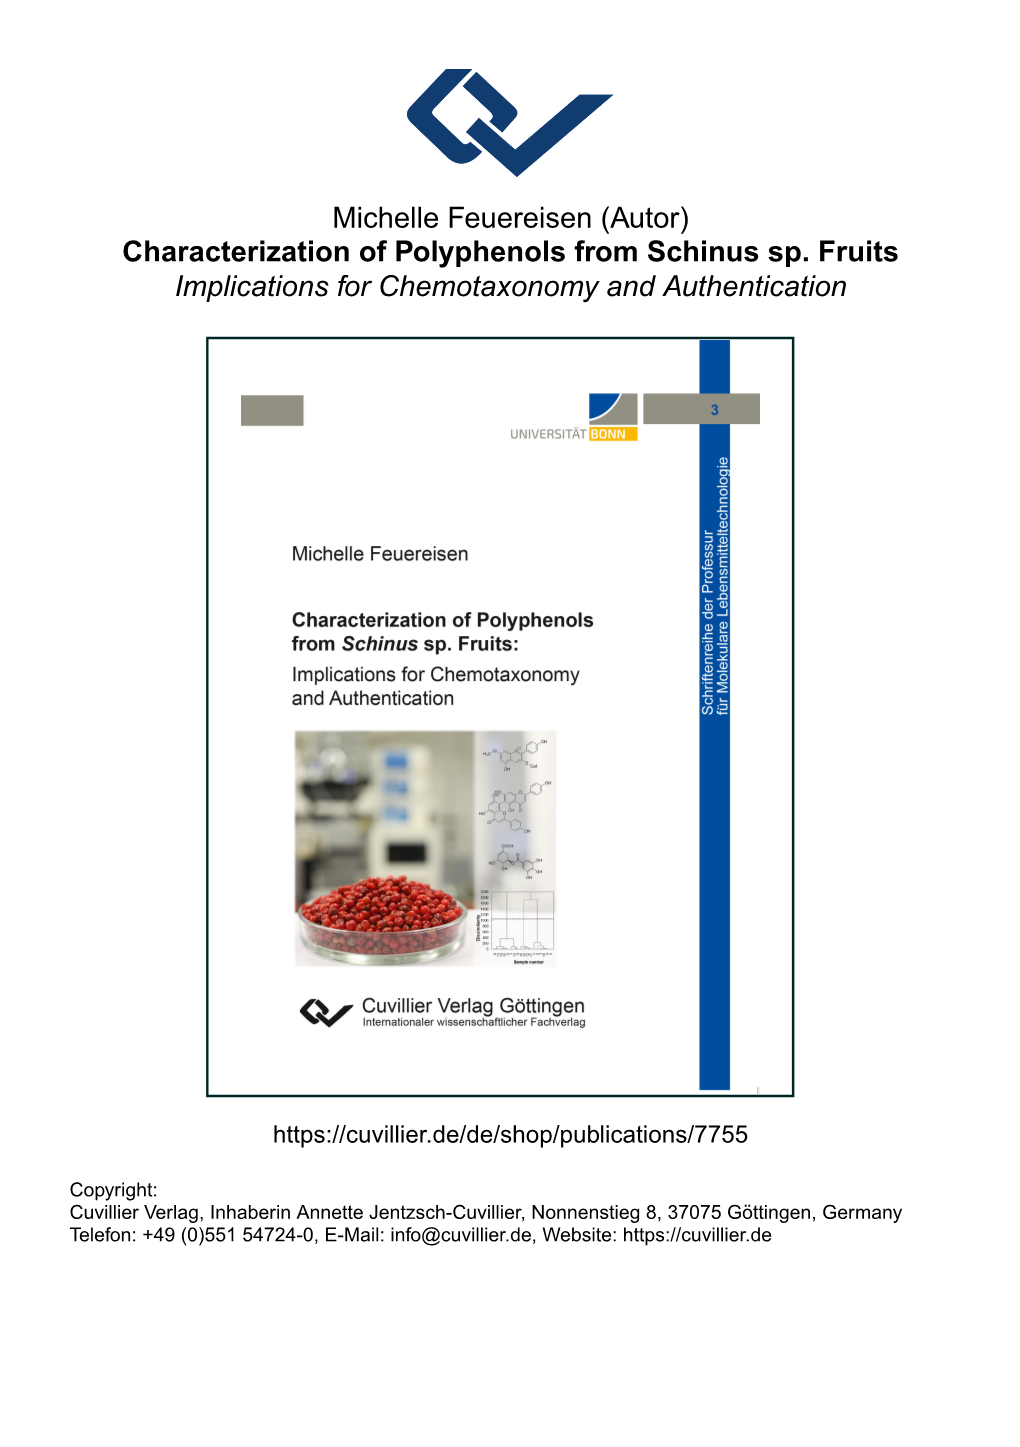 Characterization of Polyphenols from Schinus Sp